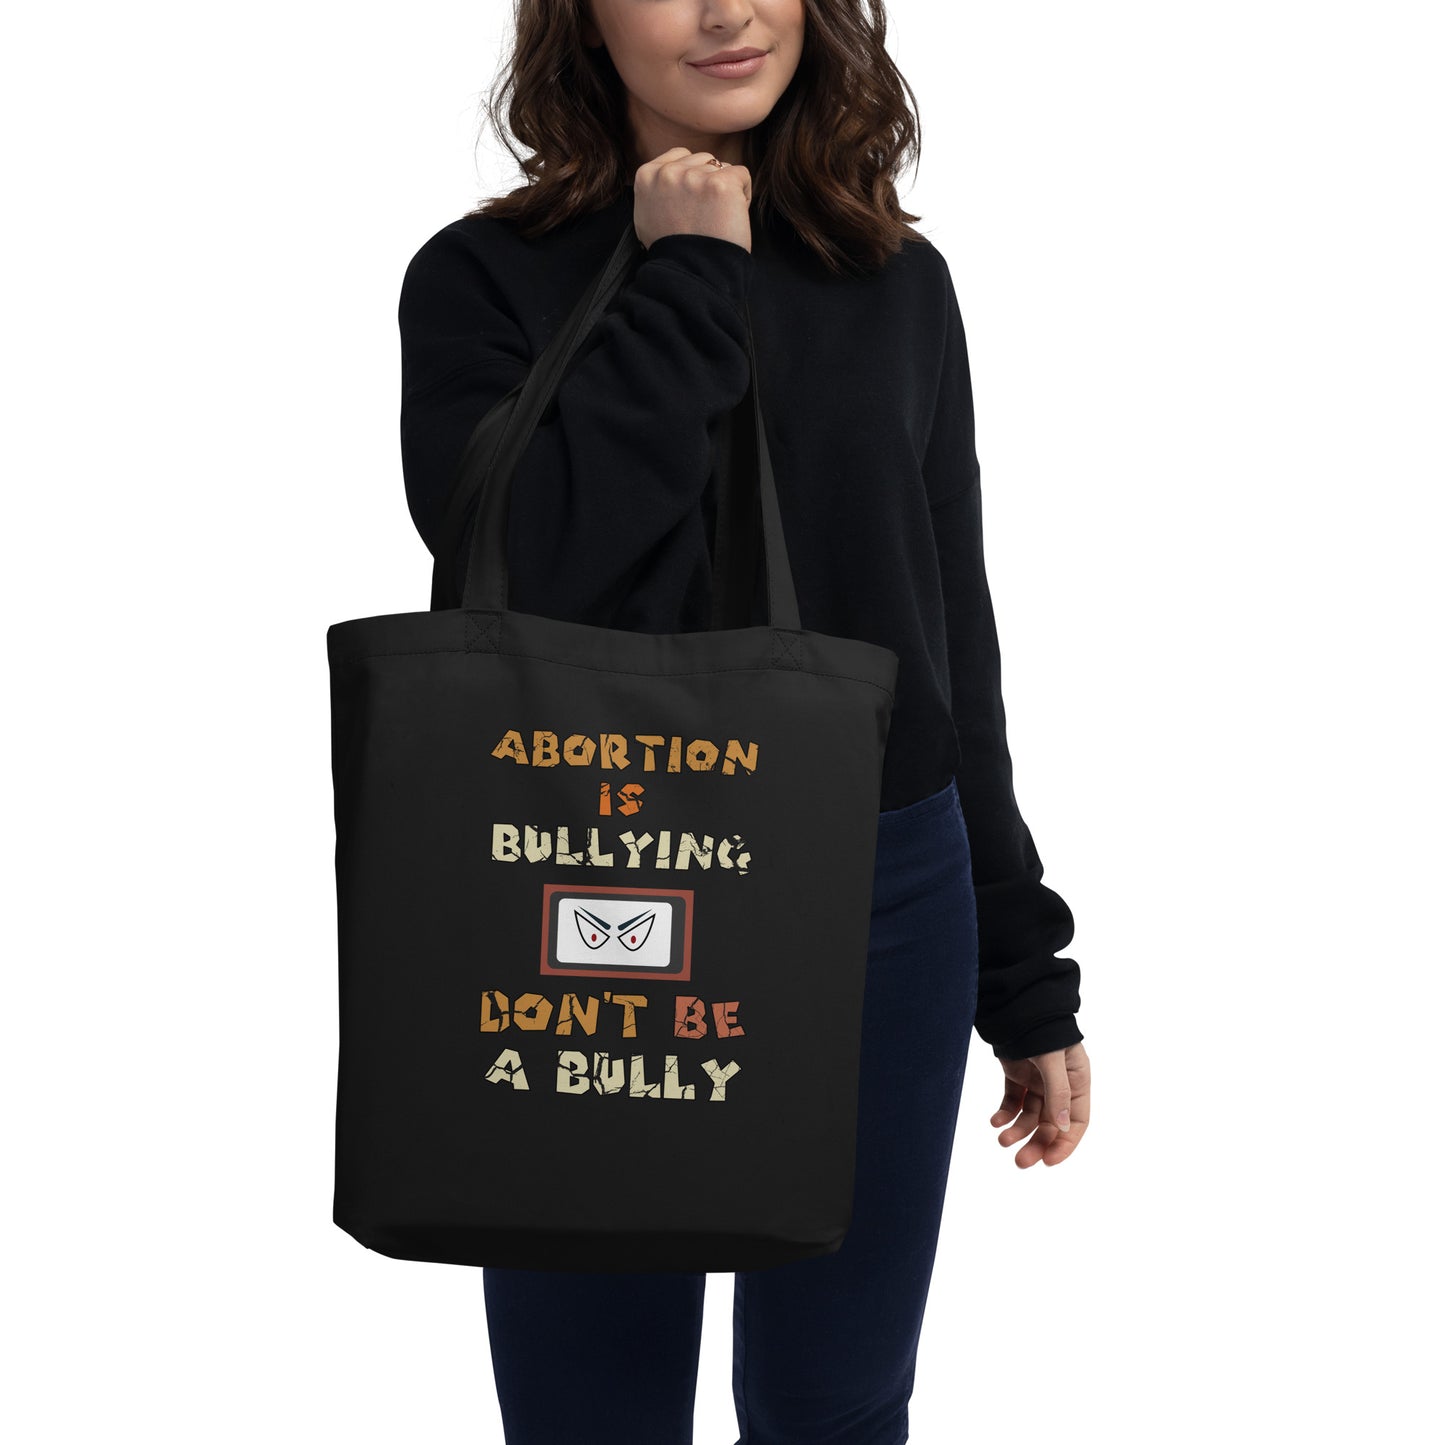 A001 Tote – Eco Tote Bag Featuring Sinister Eyes Graphic with text “Abortion is Bullying. Don’t be a Bully.”